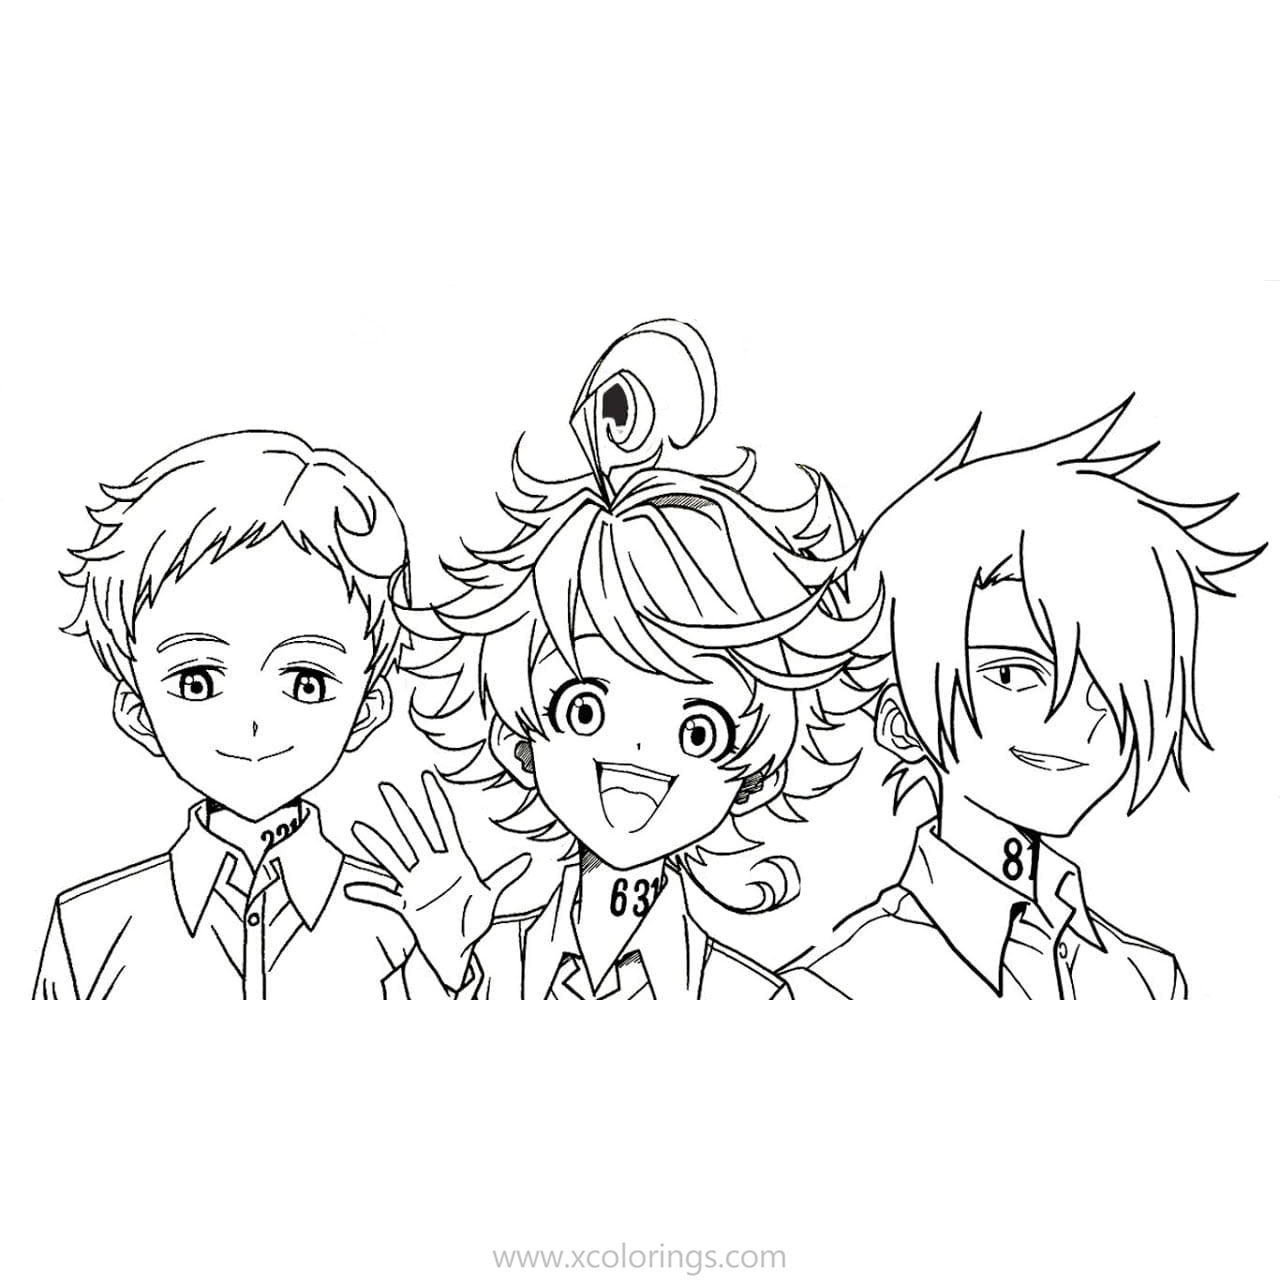 Free The Promised Neverland Coloring Pages Characters printable